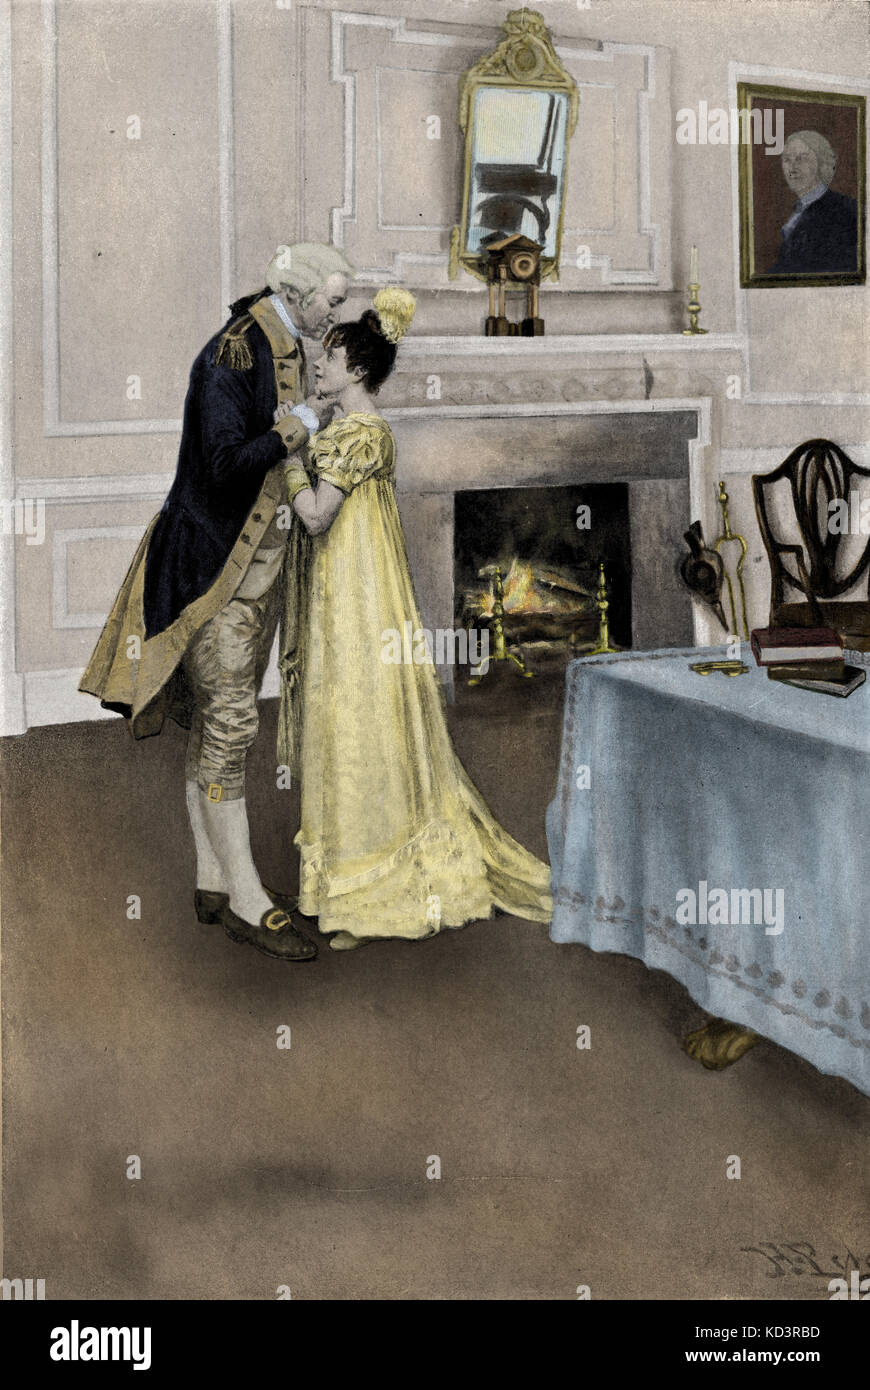 George Washington and Nellie Custis, 1790s. Eleanor Parke Custis Lewis (March 31, 1779 – July 15, 1852), granddaughter of Martha Washington, adopted as a daughter by George Washington after her father's death. Illustration by Howard Pyle, 1896 Stock Photo